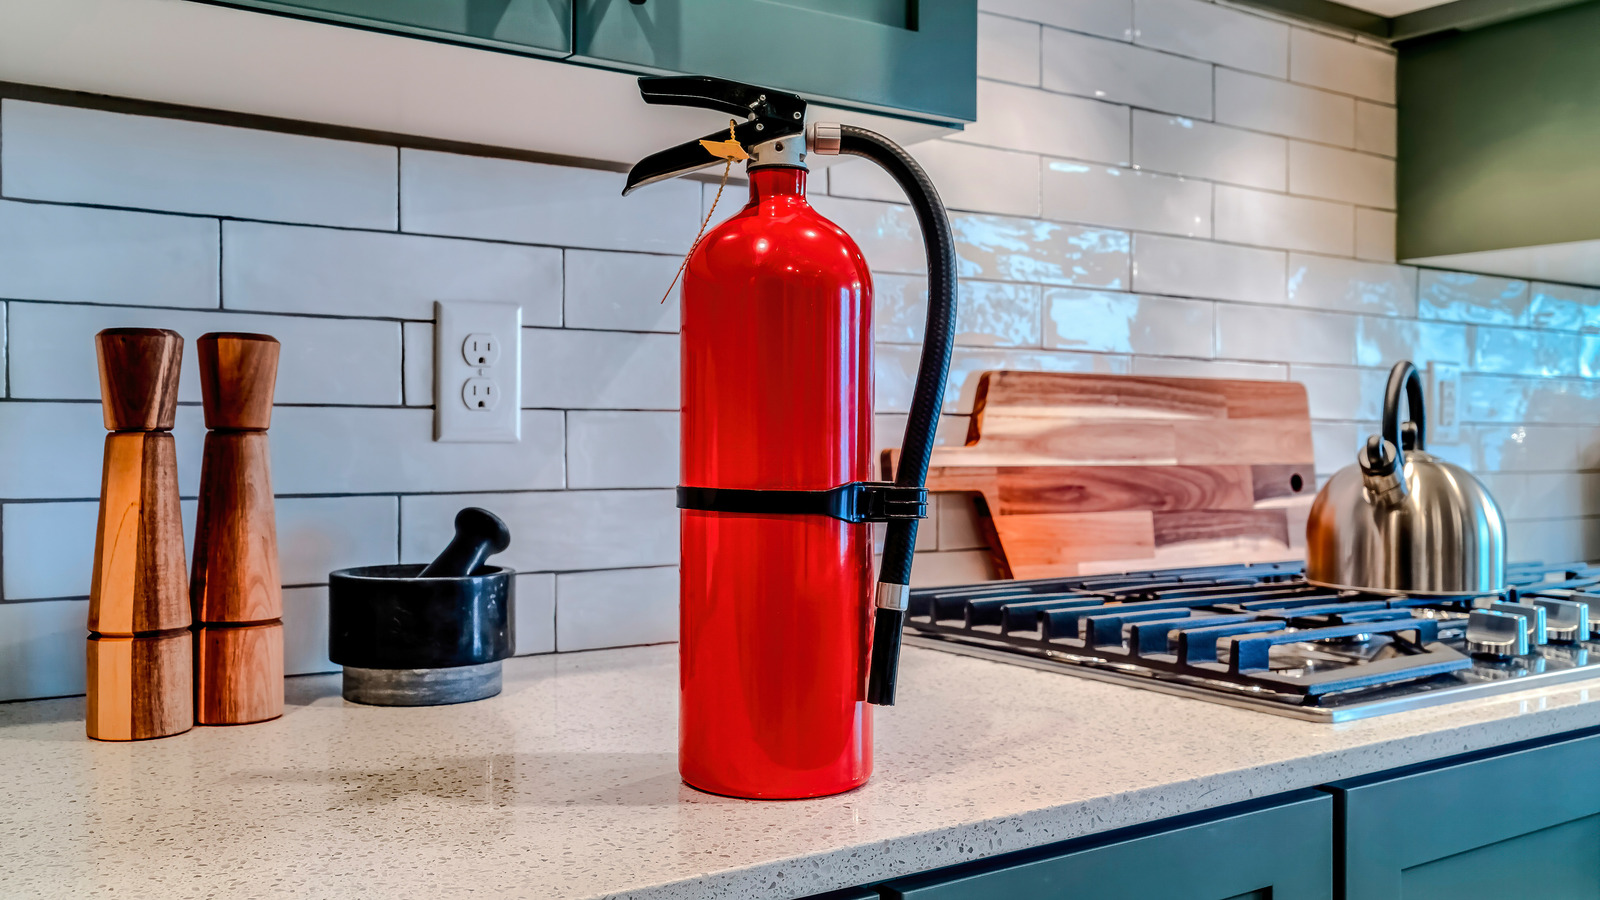 The 5 Best Places In Your Home To Store Your Fire Extinguisher